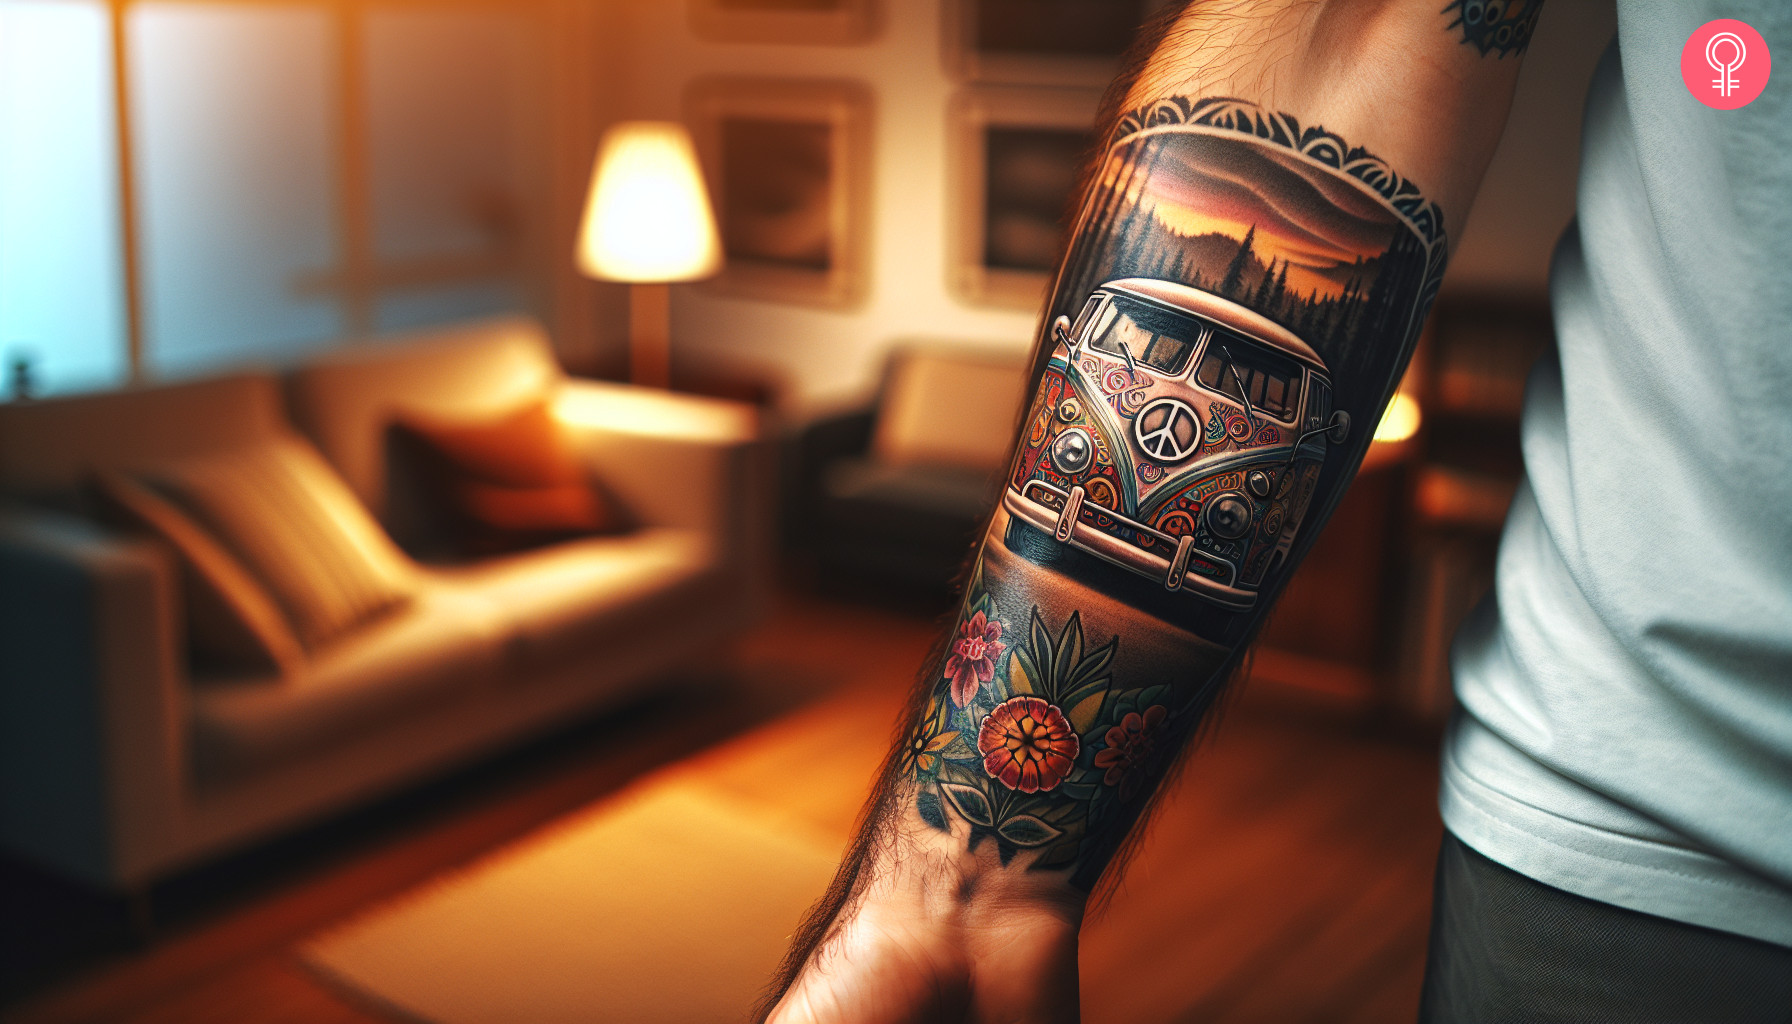 A hippie tattoo on the forearm of a man